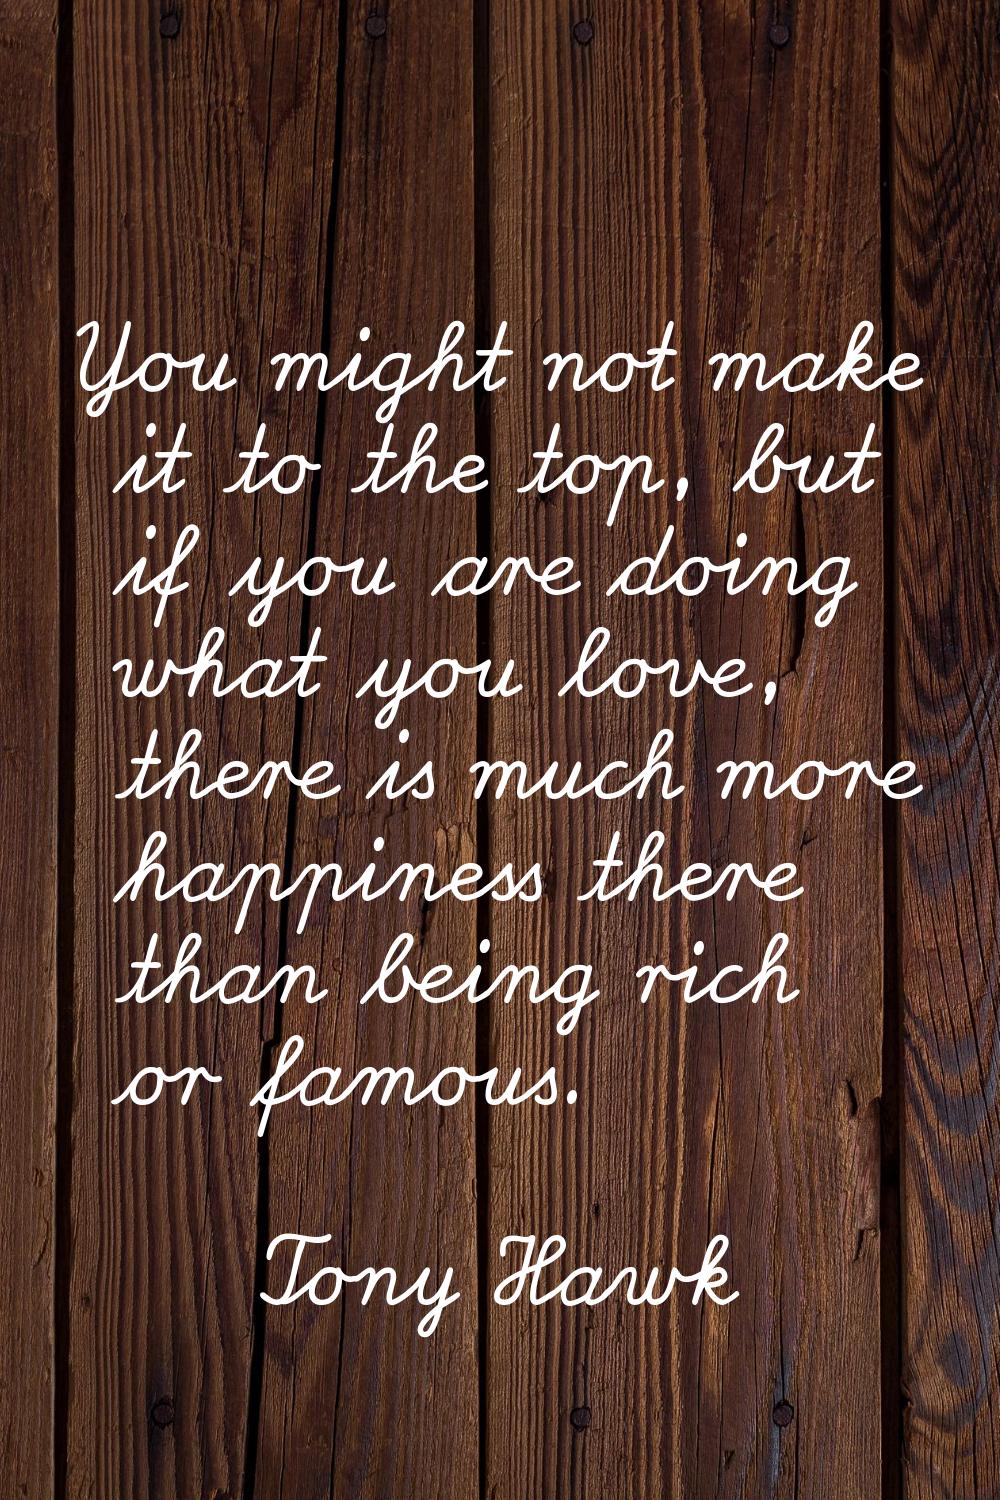 You might not make it to the top, but if you are doing what you love, there is much more happiness 